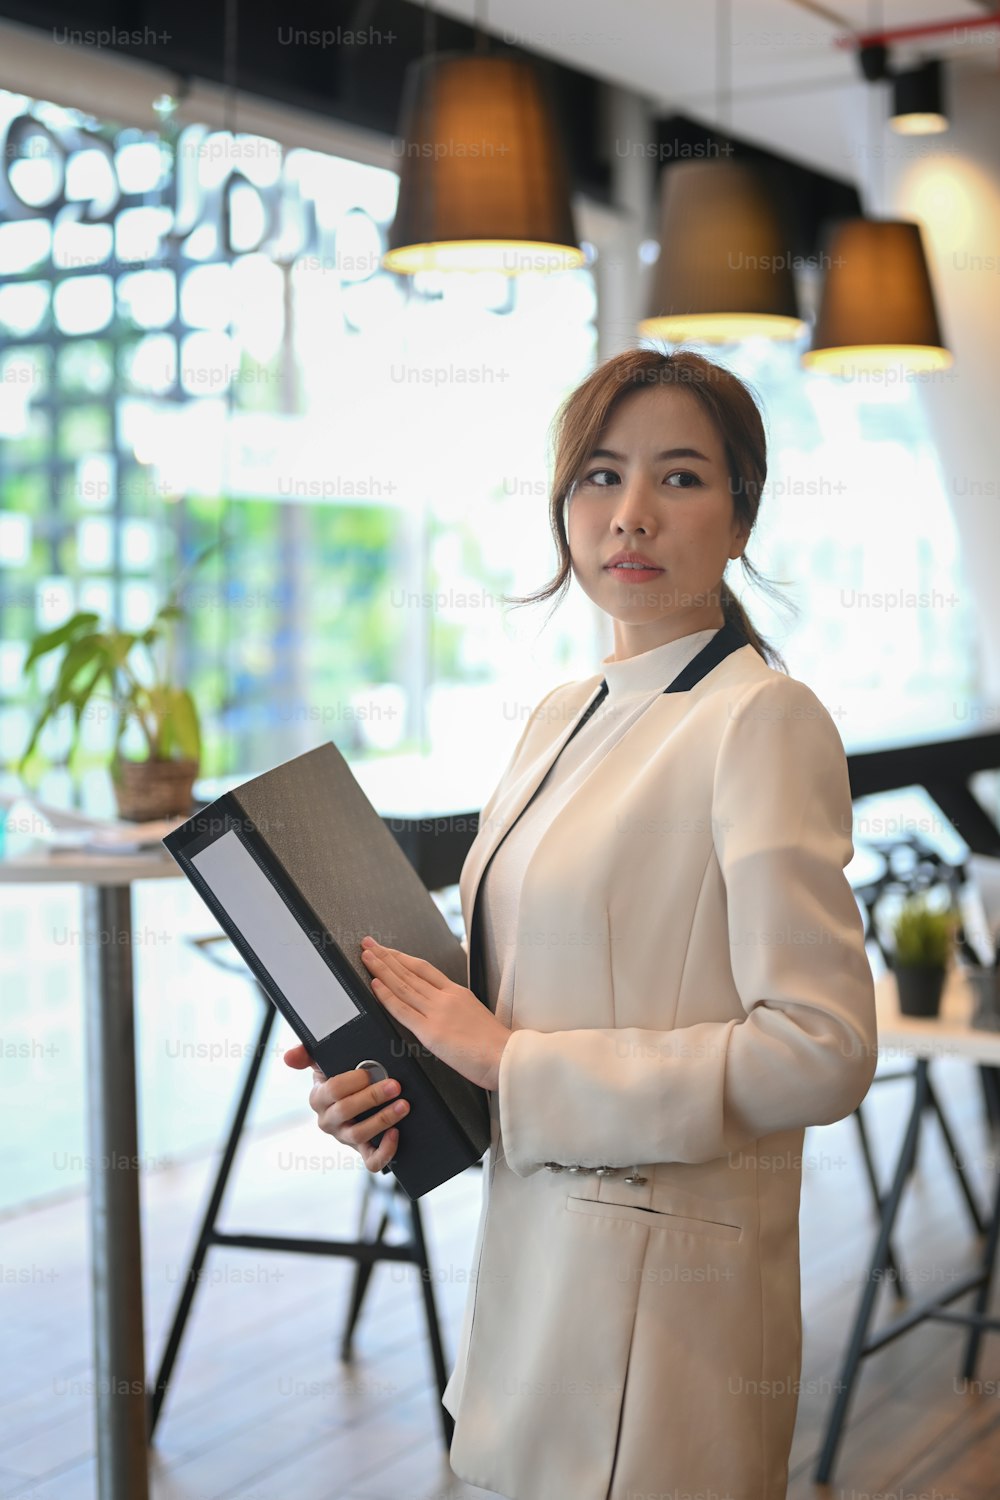 Portrait of confident woman entrepreneur holding file folder and looking away while standing in modern workplace.